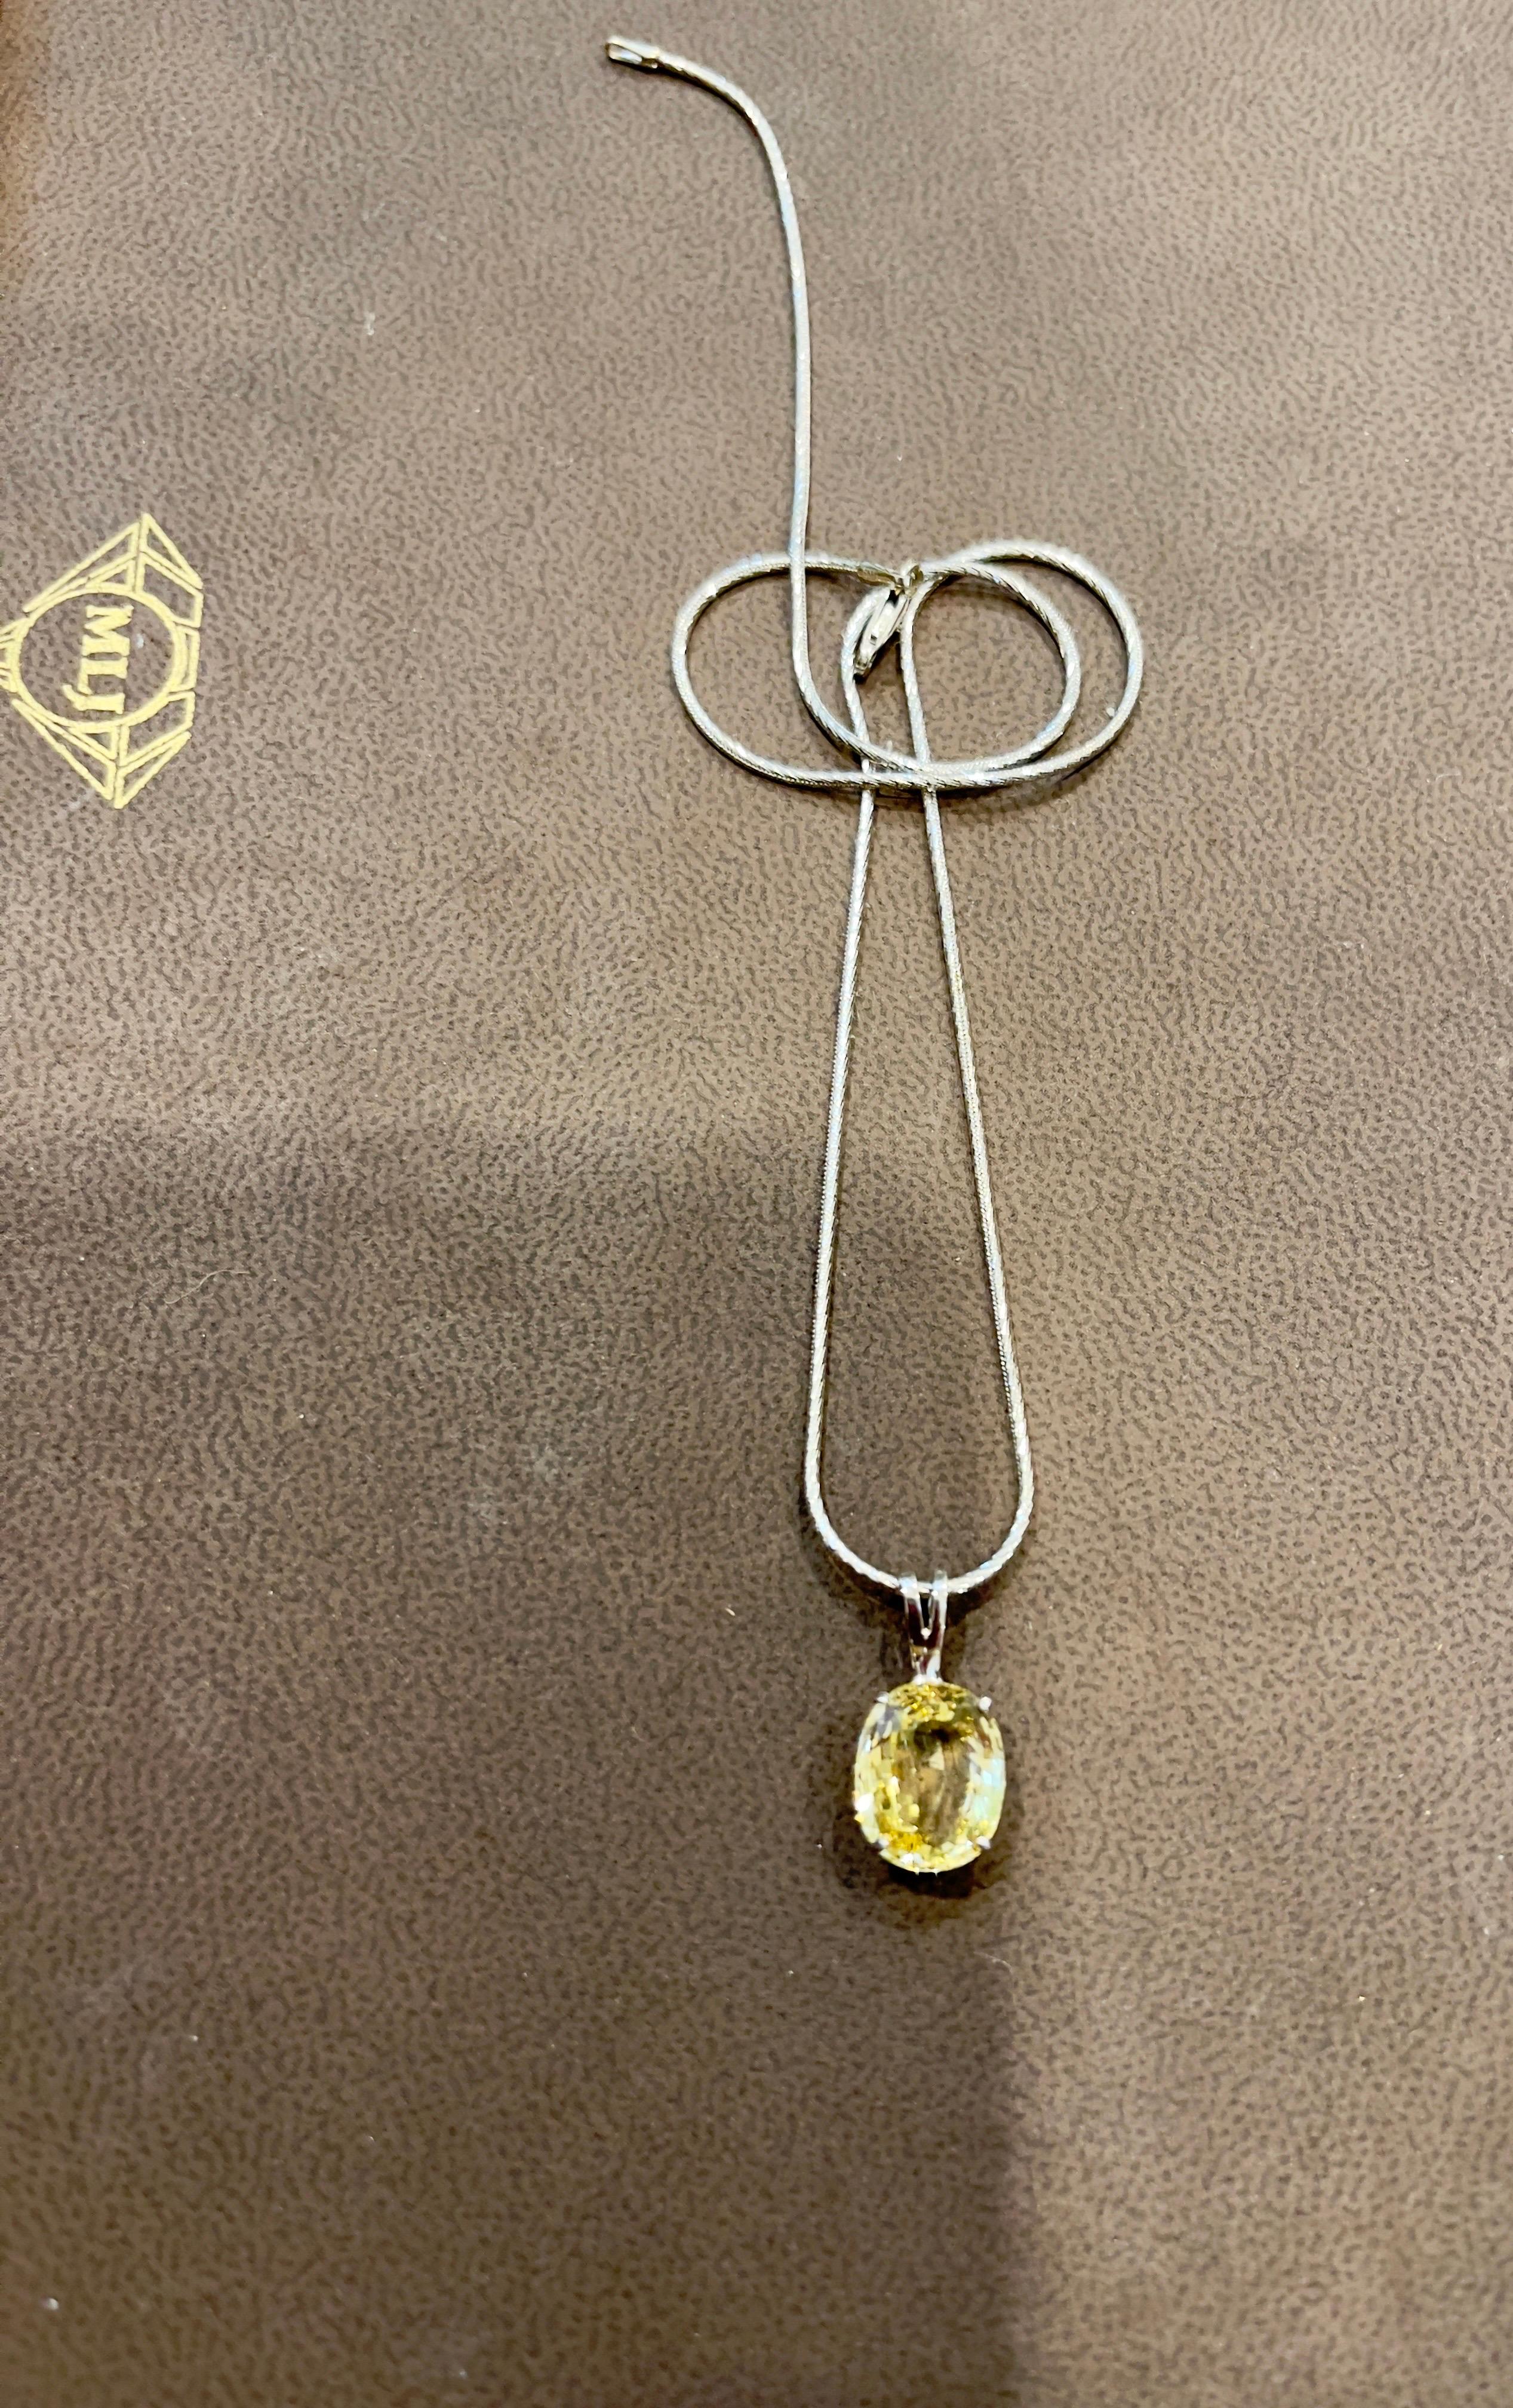 GIA Certified 5.56 Ct Natural Ceylon Yellow Sapphire Pendant Necklace white Gold For Sale 12